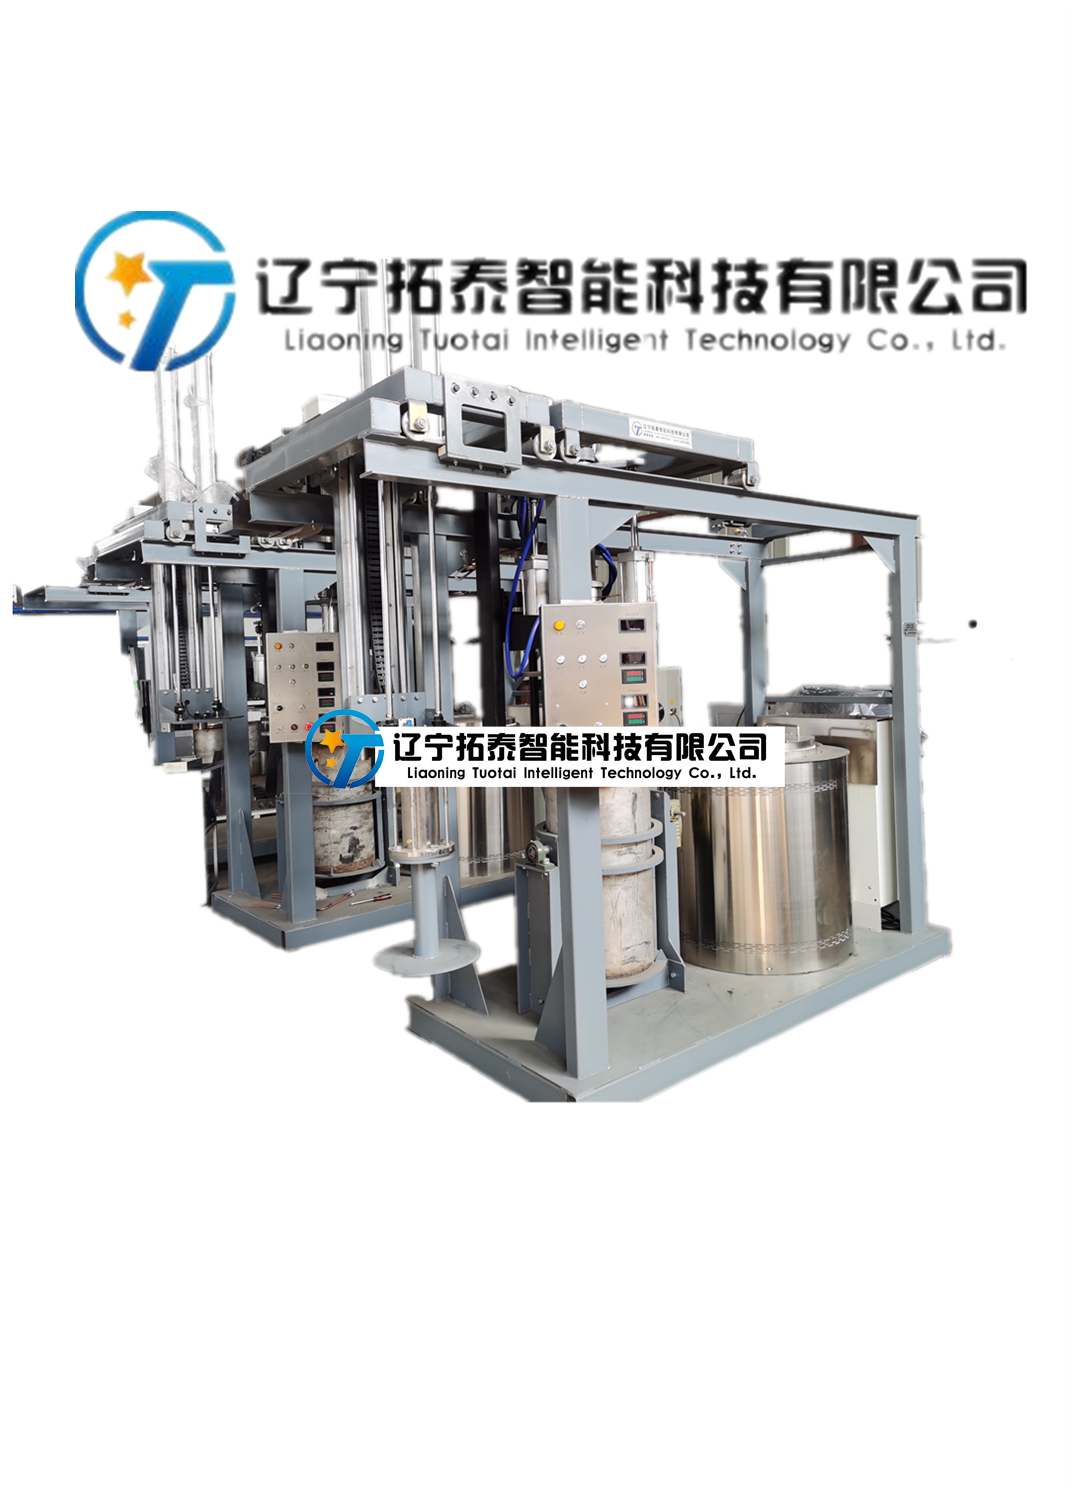 TT-YLD1-40 type simulated pressure test coke oven (load test coke oven)